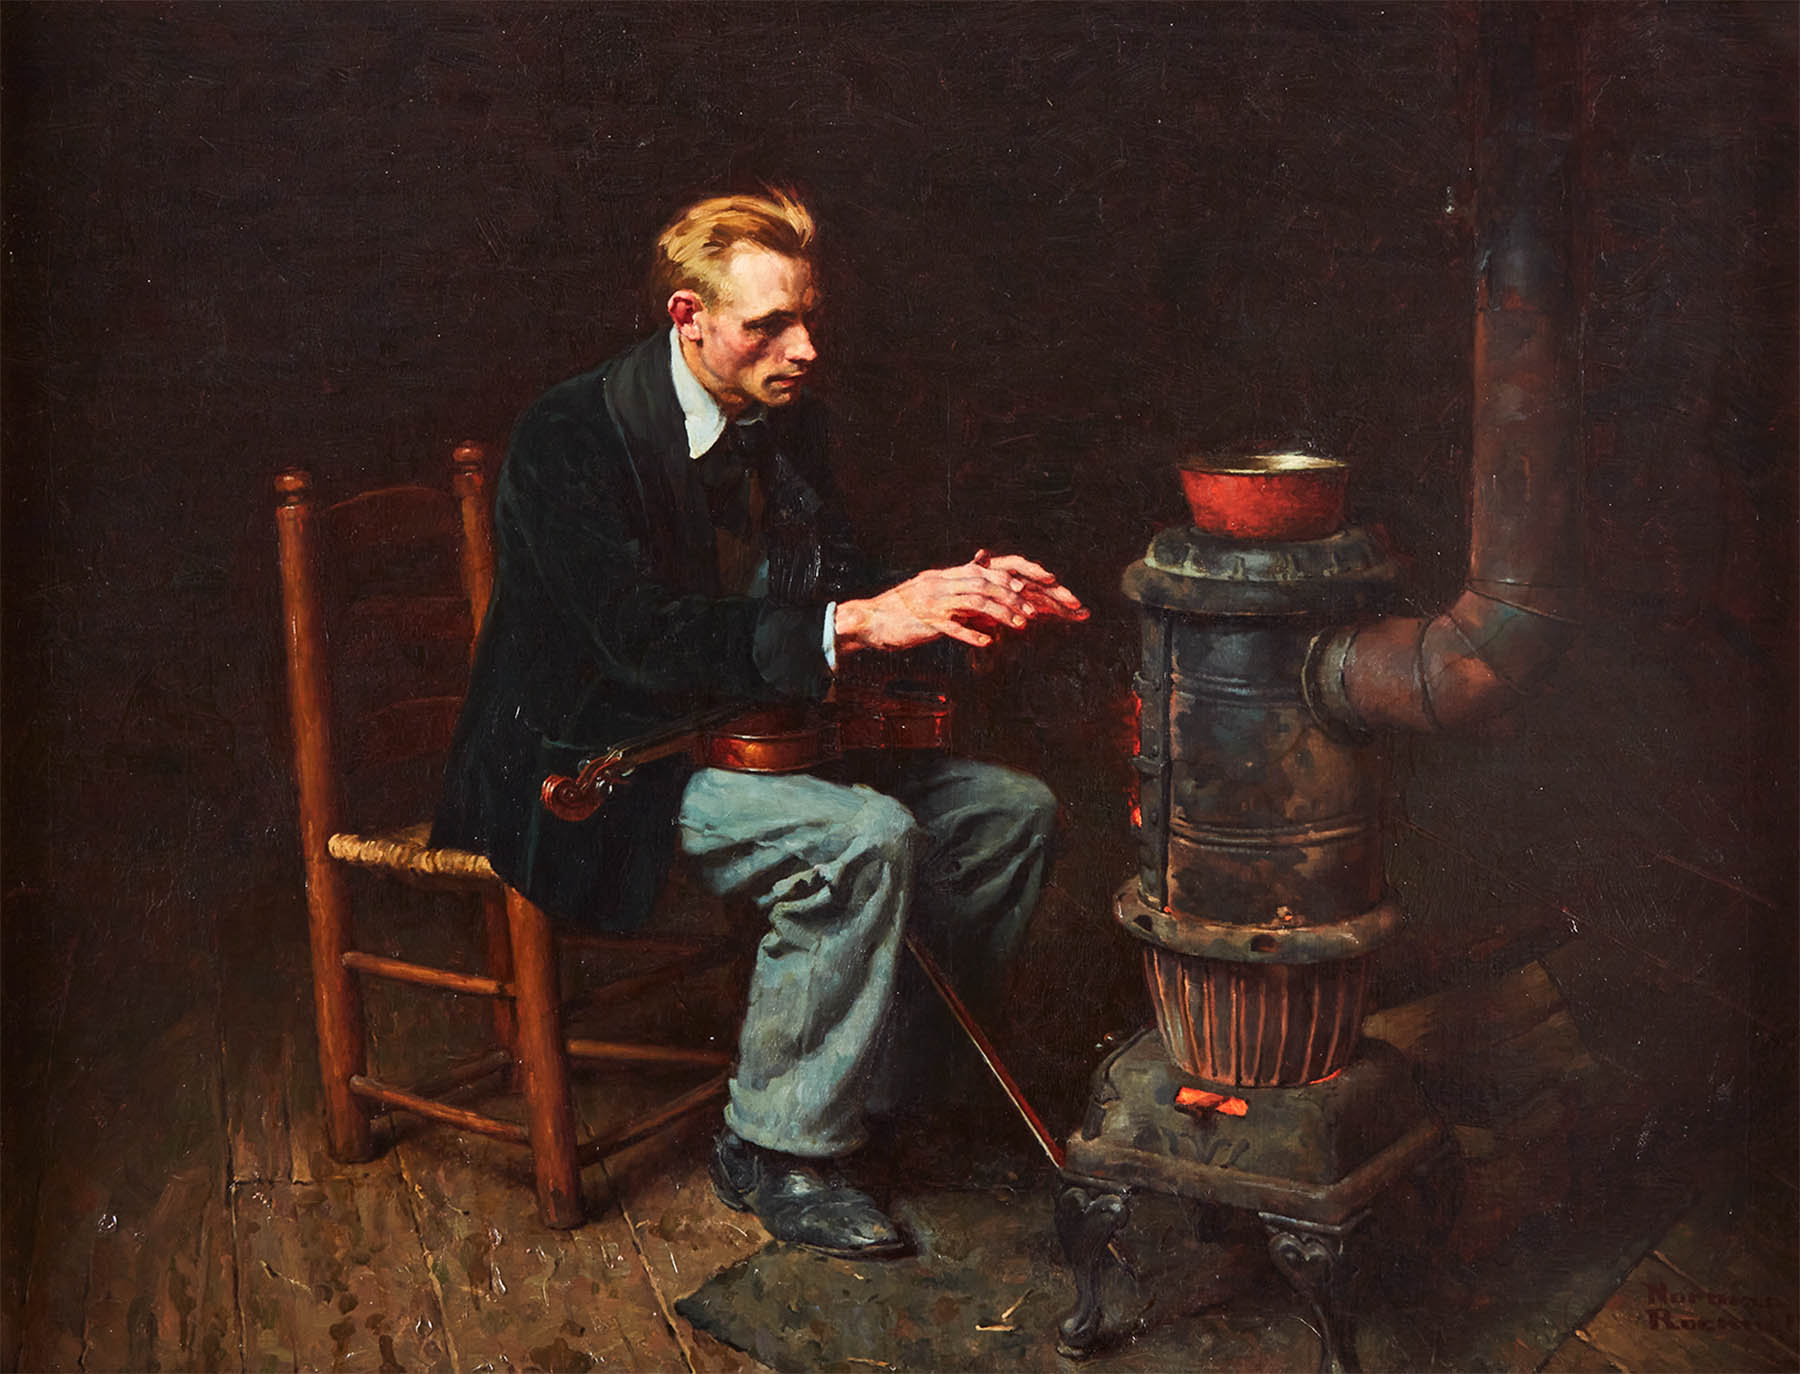 Norman Rockwell Painting, The Melody Stilled by Cold